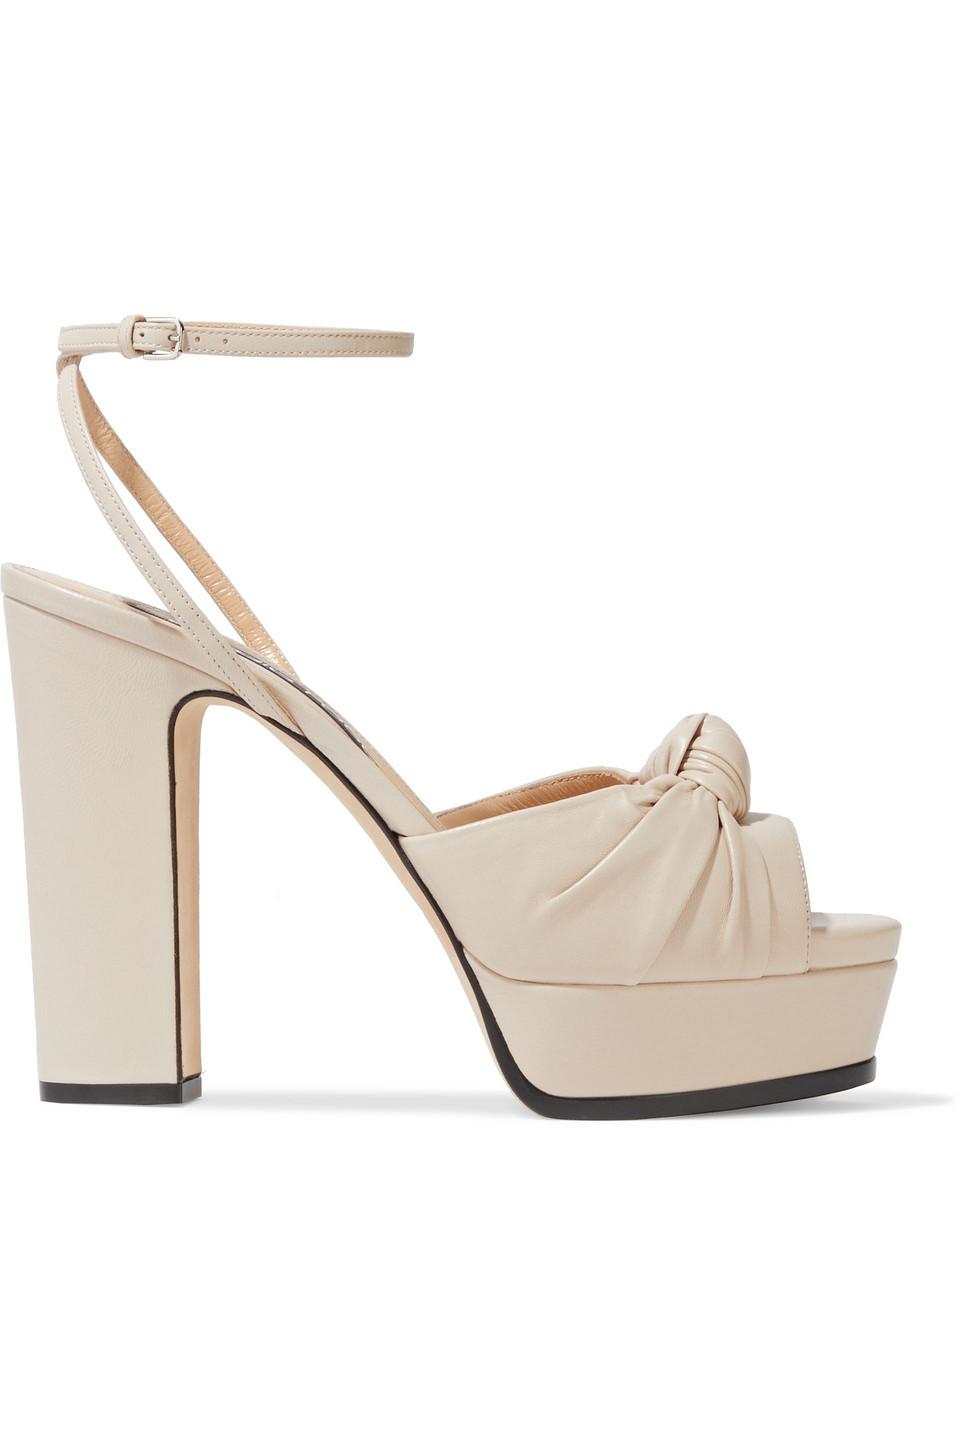 Sergio Rossi Kaia Knotted Leather Platform Sandals in Natural | Lyst